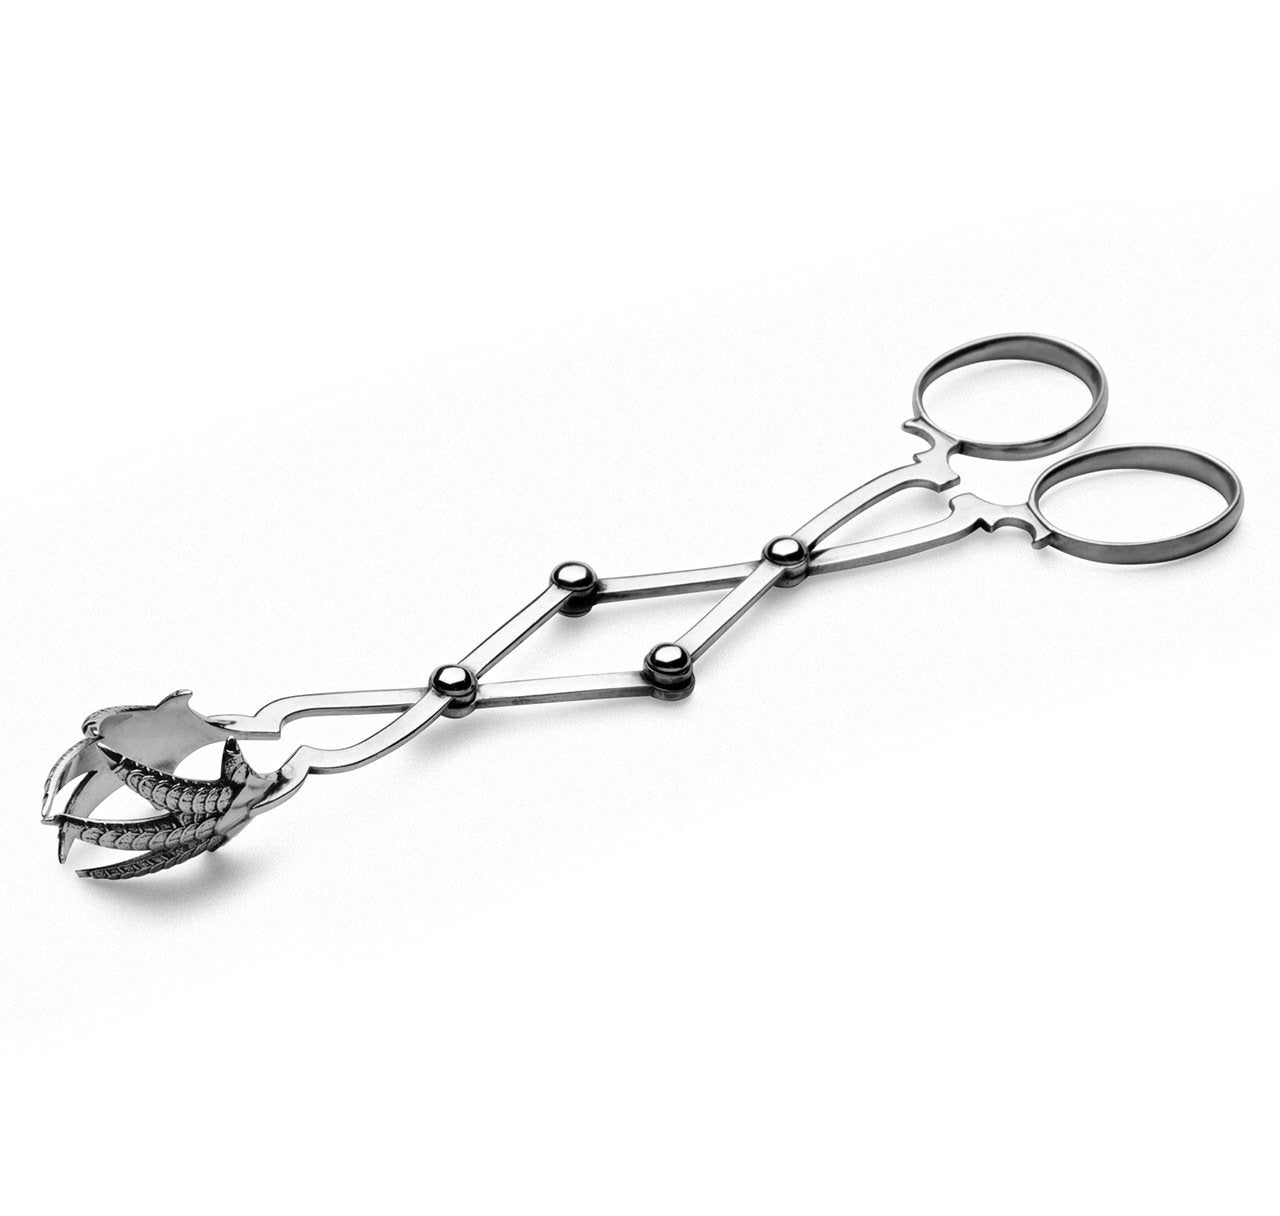 Gorham Sterling Silver Hinged Ice Tongs